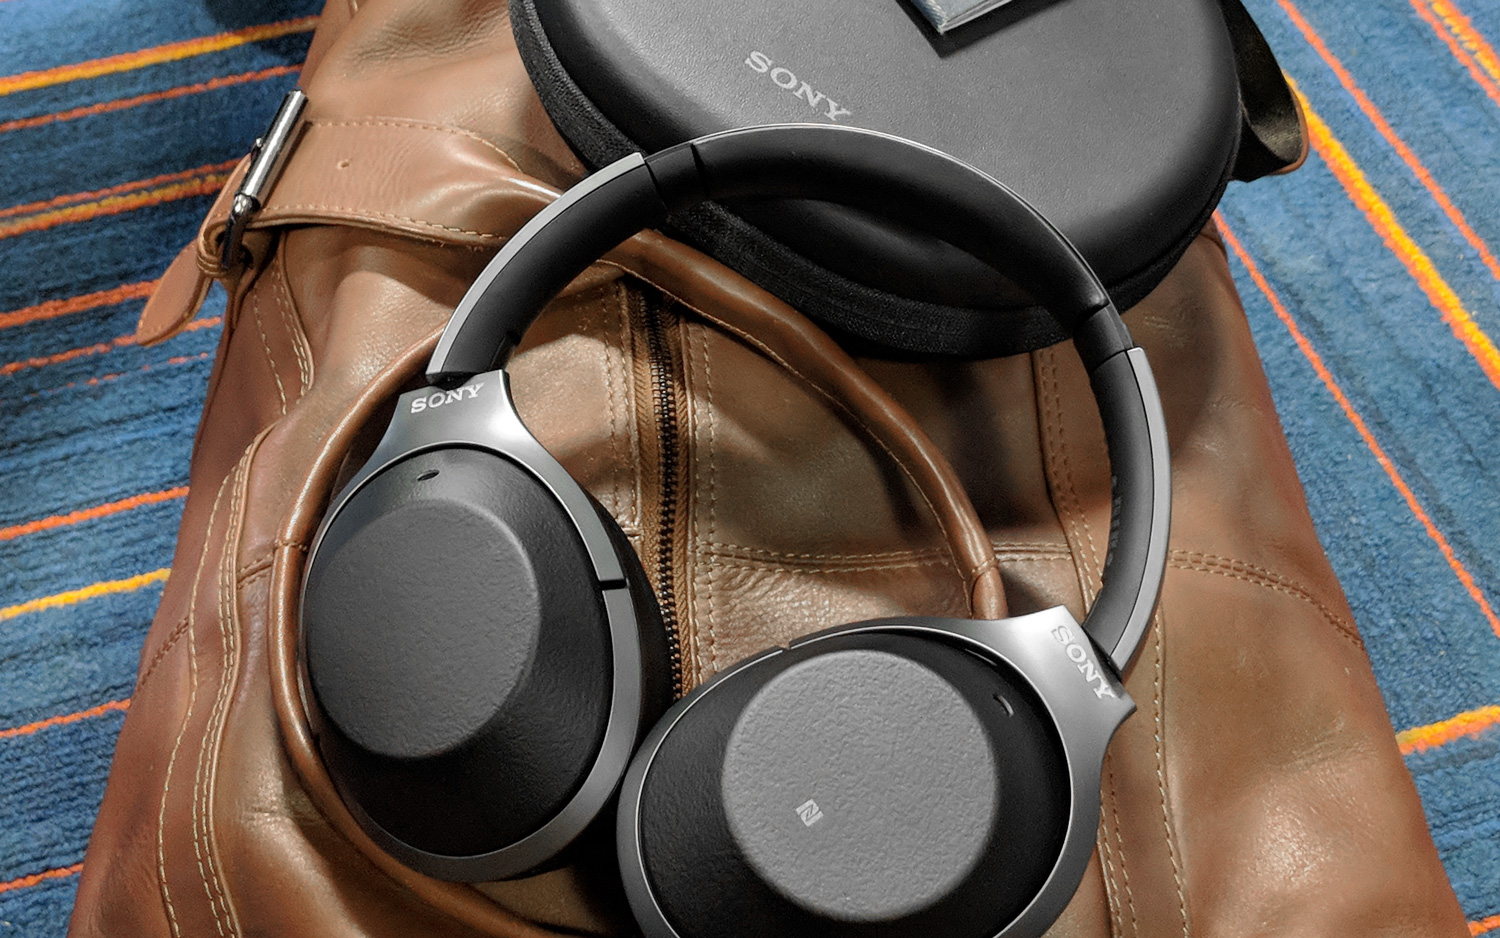 Sony WH-1000xM2 Review: A Killer Bose Alternative | Tom's Guide